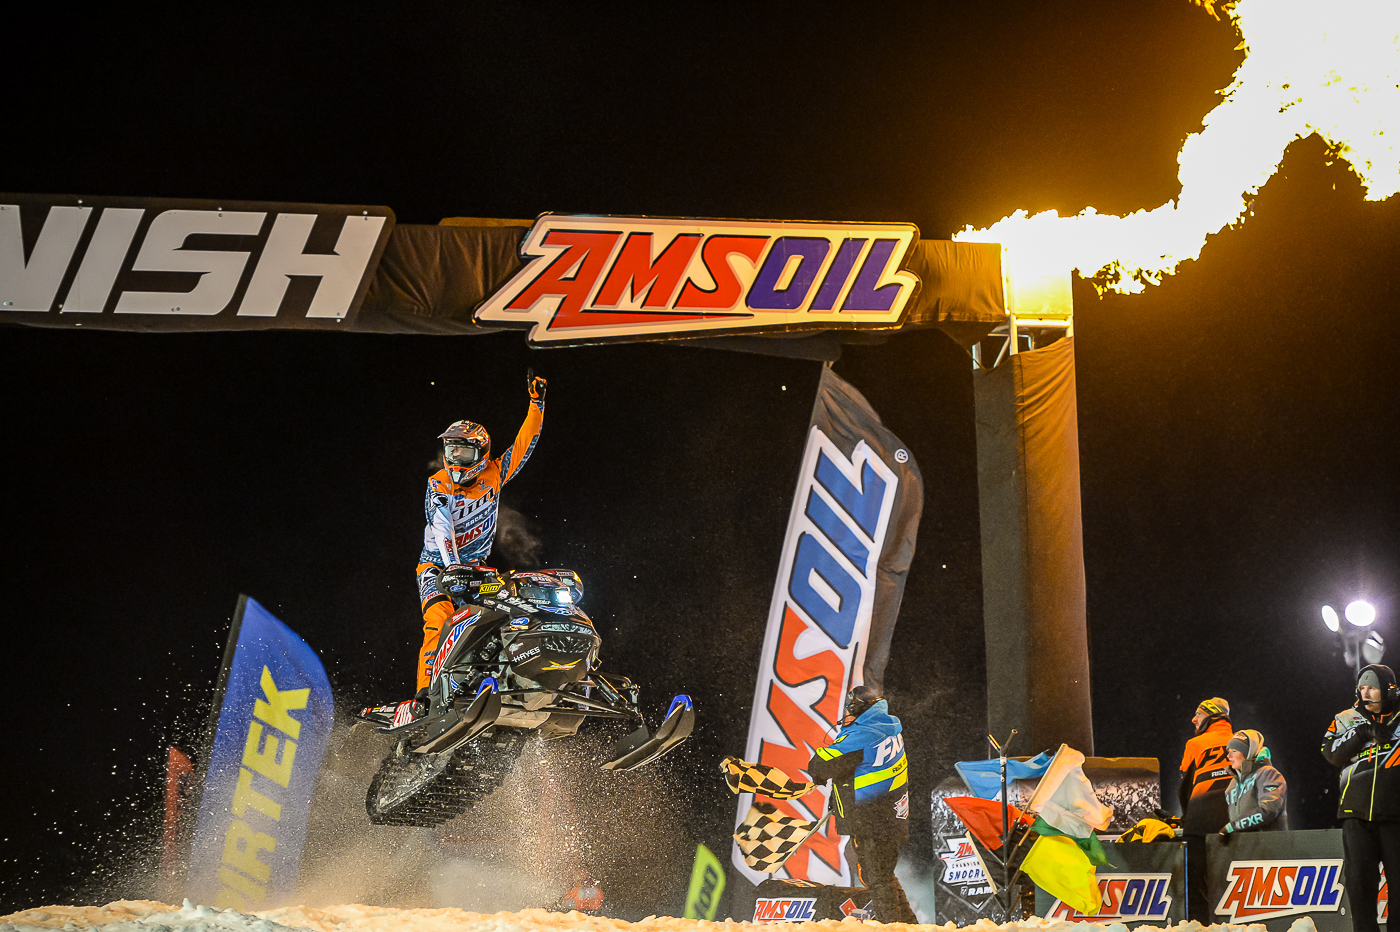 From Snow to Dirt, Your AMSOIL Racing & Events Update